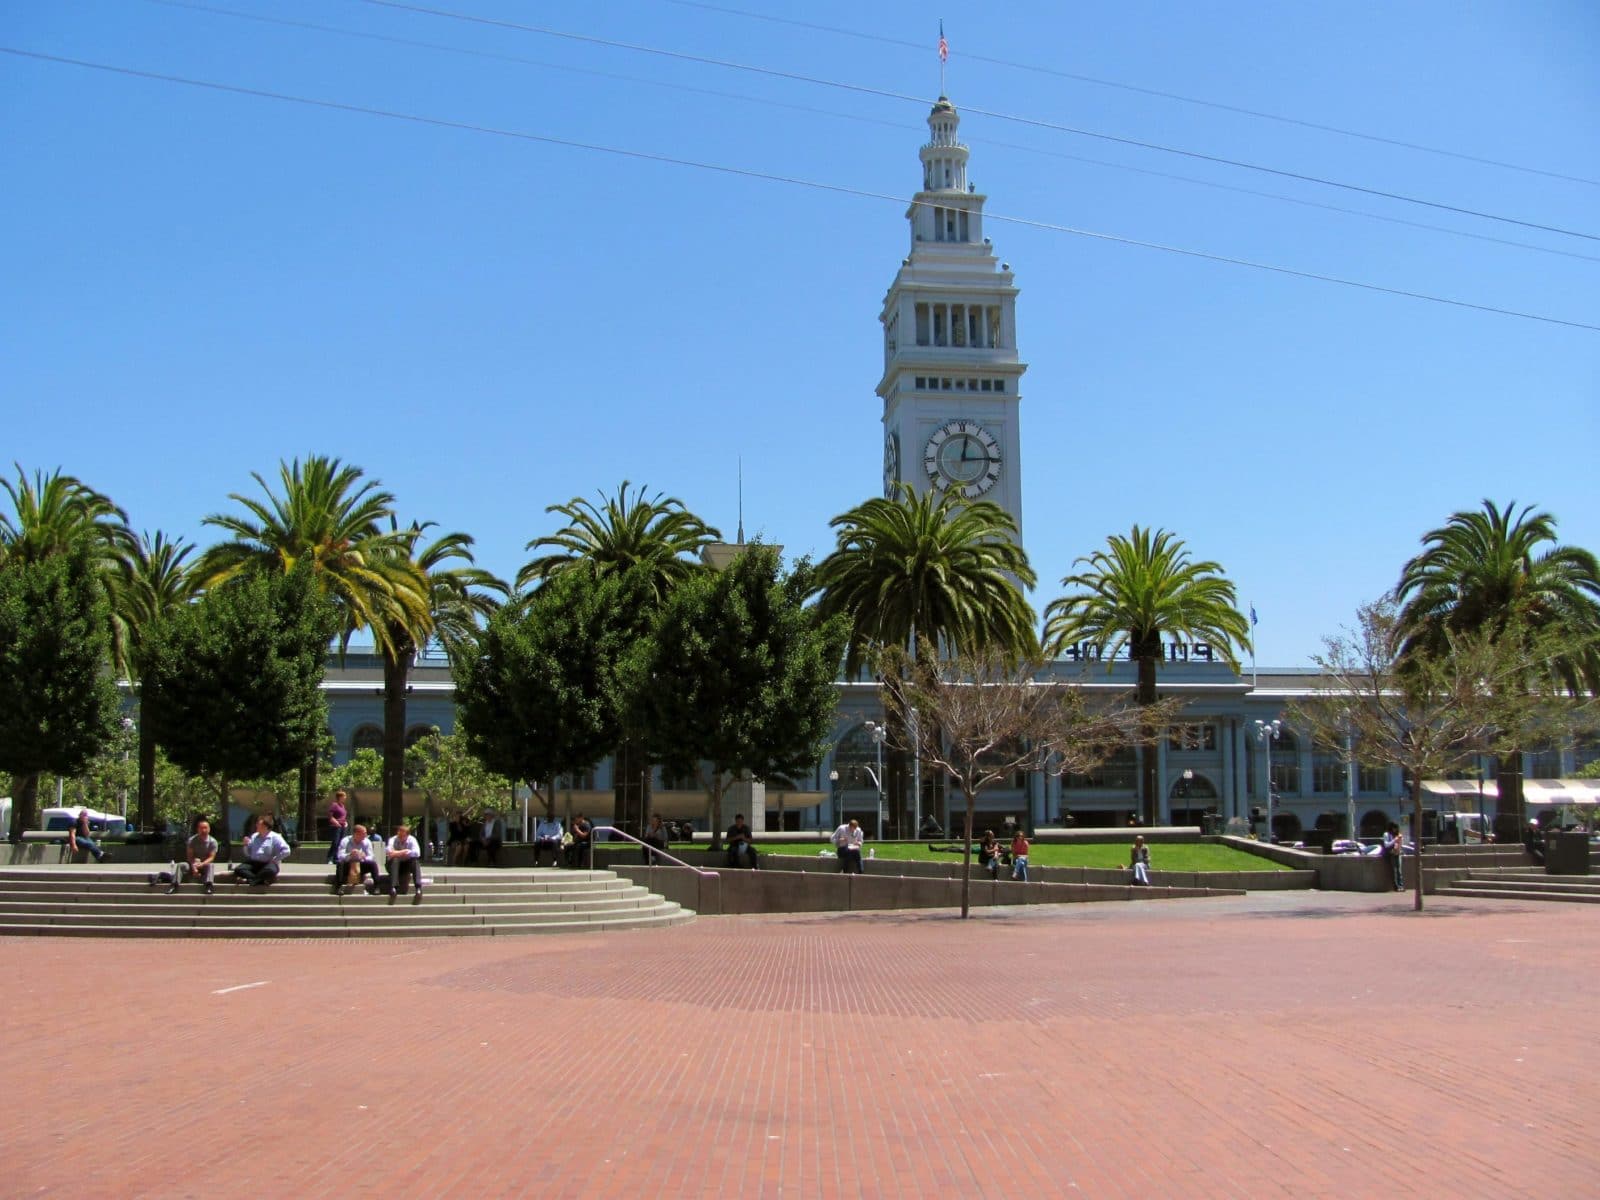 The Ferry Building is across the street